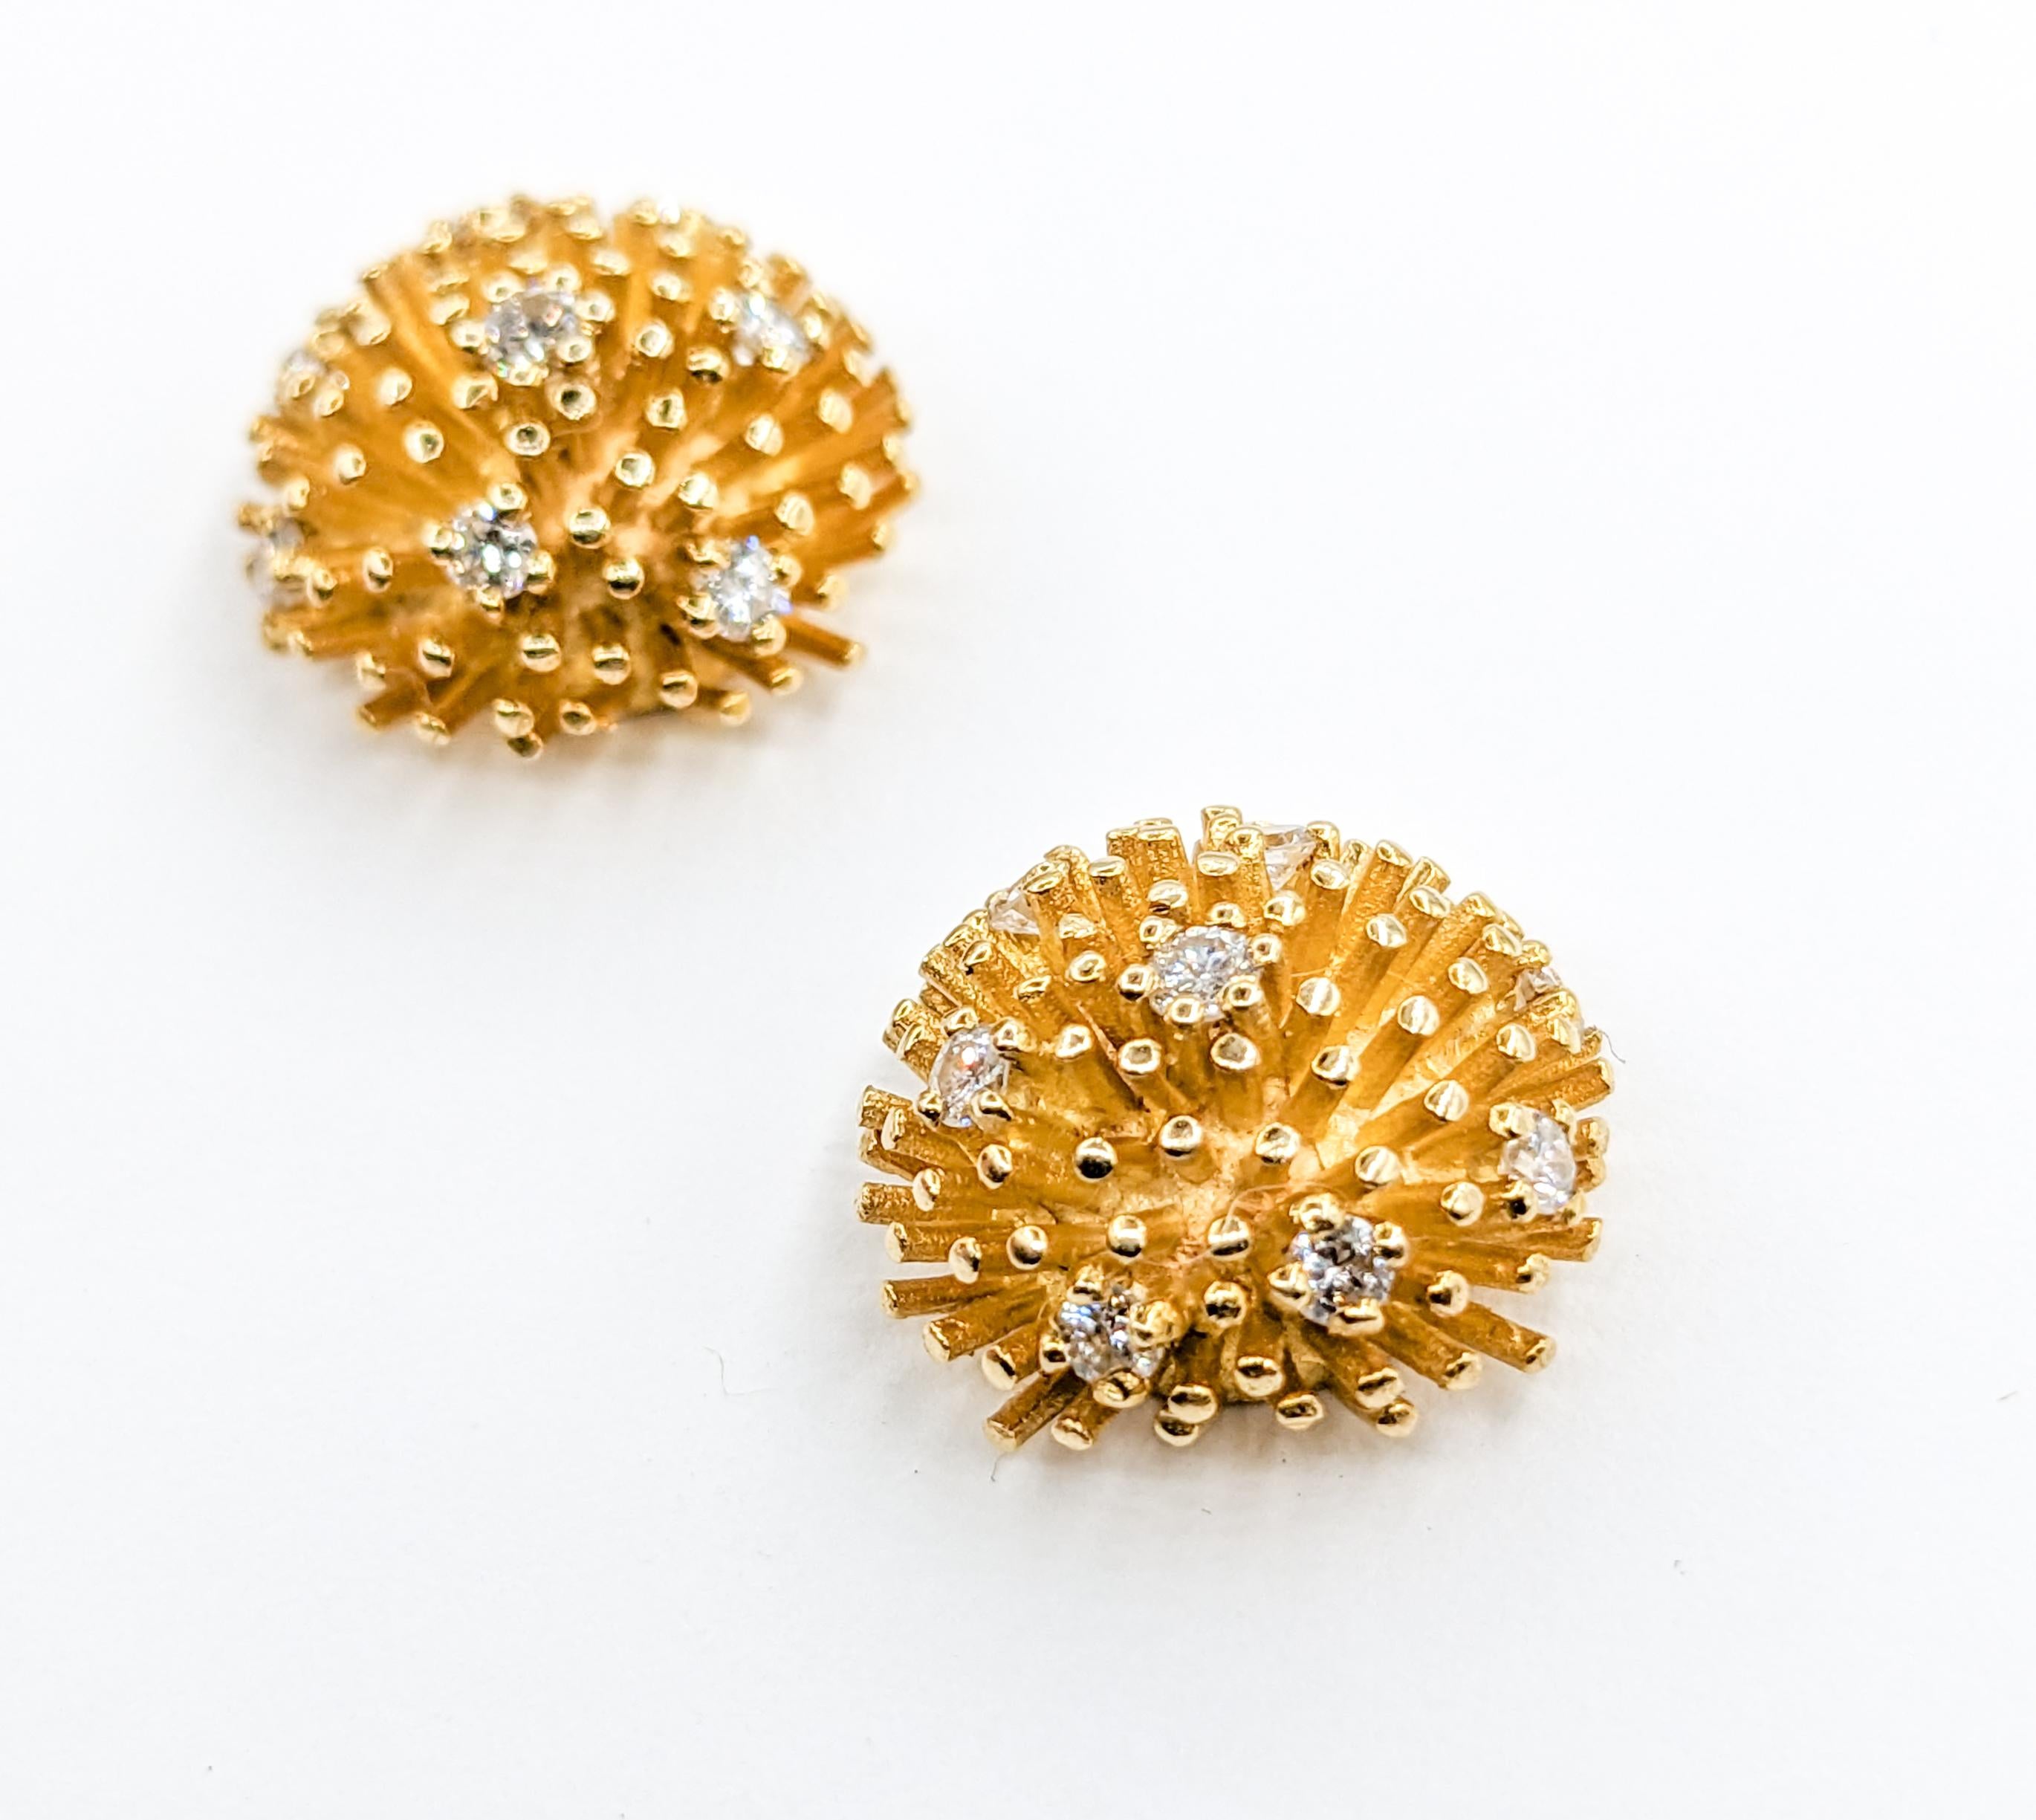 Retro Diamond Sputnik Stud Earring in Gold

Introducing our stunning Sputnik Earrings, meticulously crafted in radiant 14-karat yellow gold. These exquisite earrings feature a dazzling .50 carat total weight of round diamonds, known for their